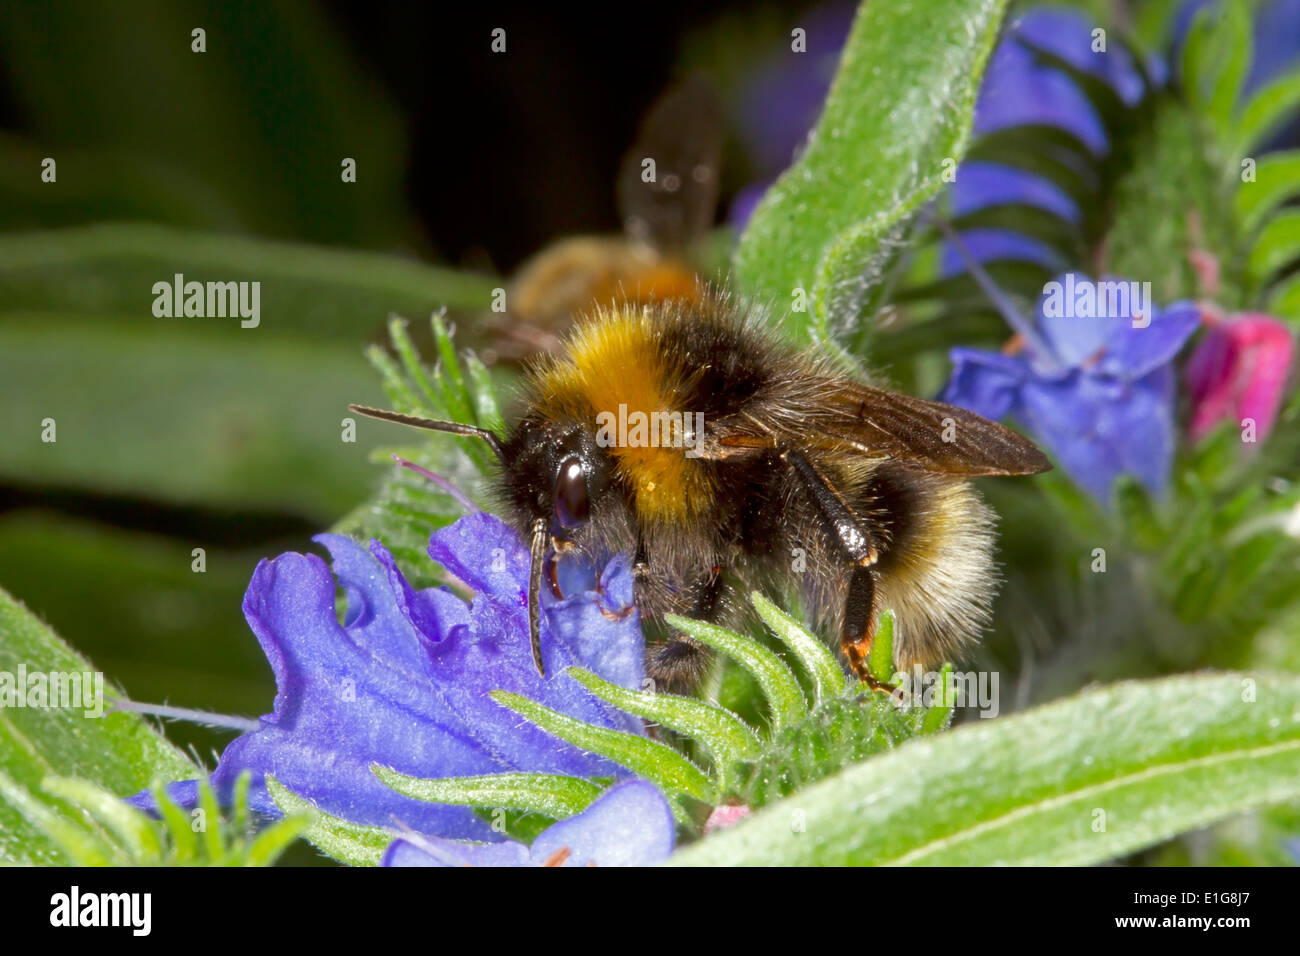 Barbut's Cuckoo Bumblebee - Bombus barbutellus - male on Viper's Bugloss. Stock Photo